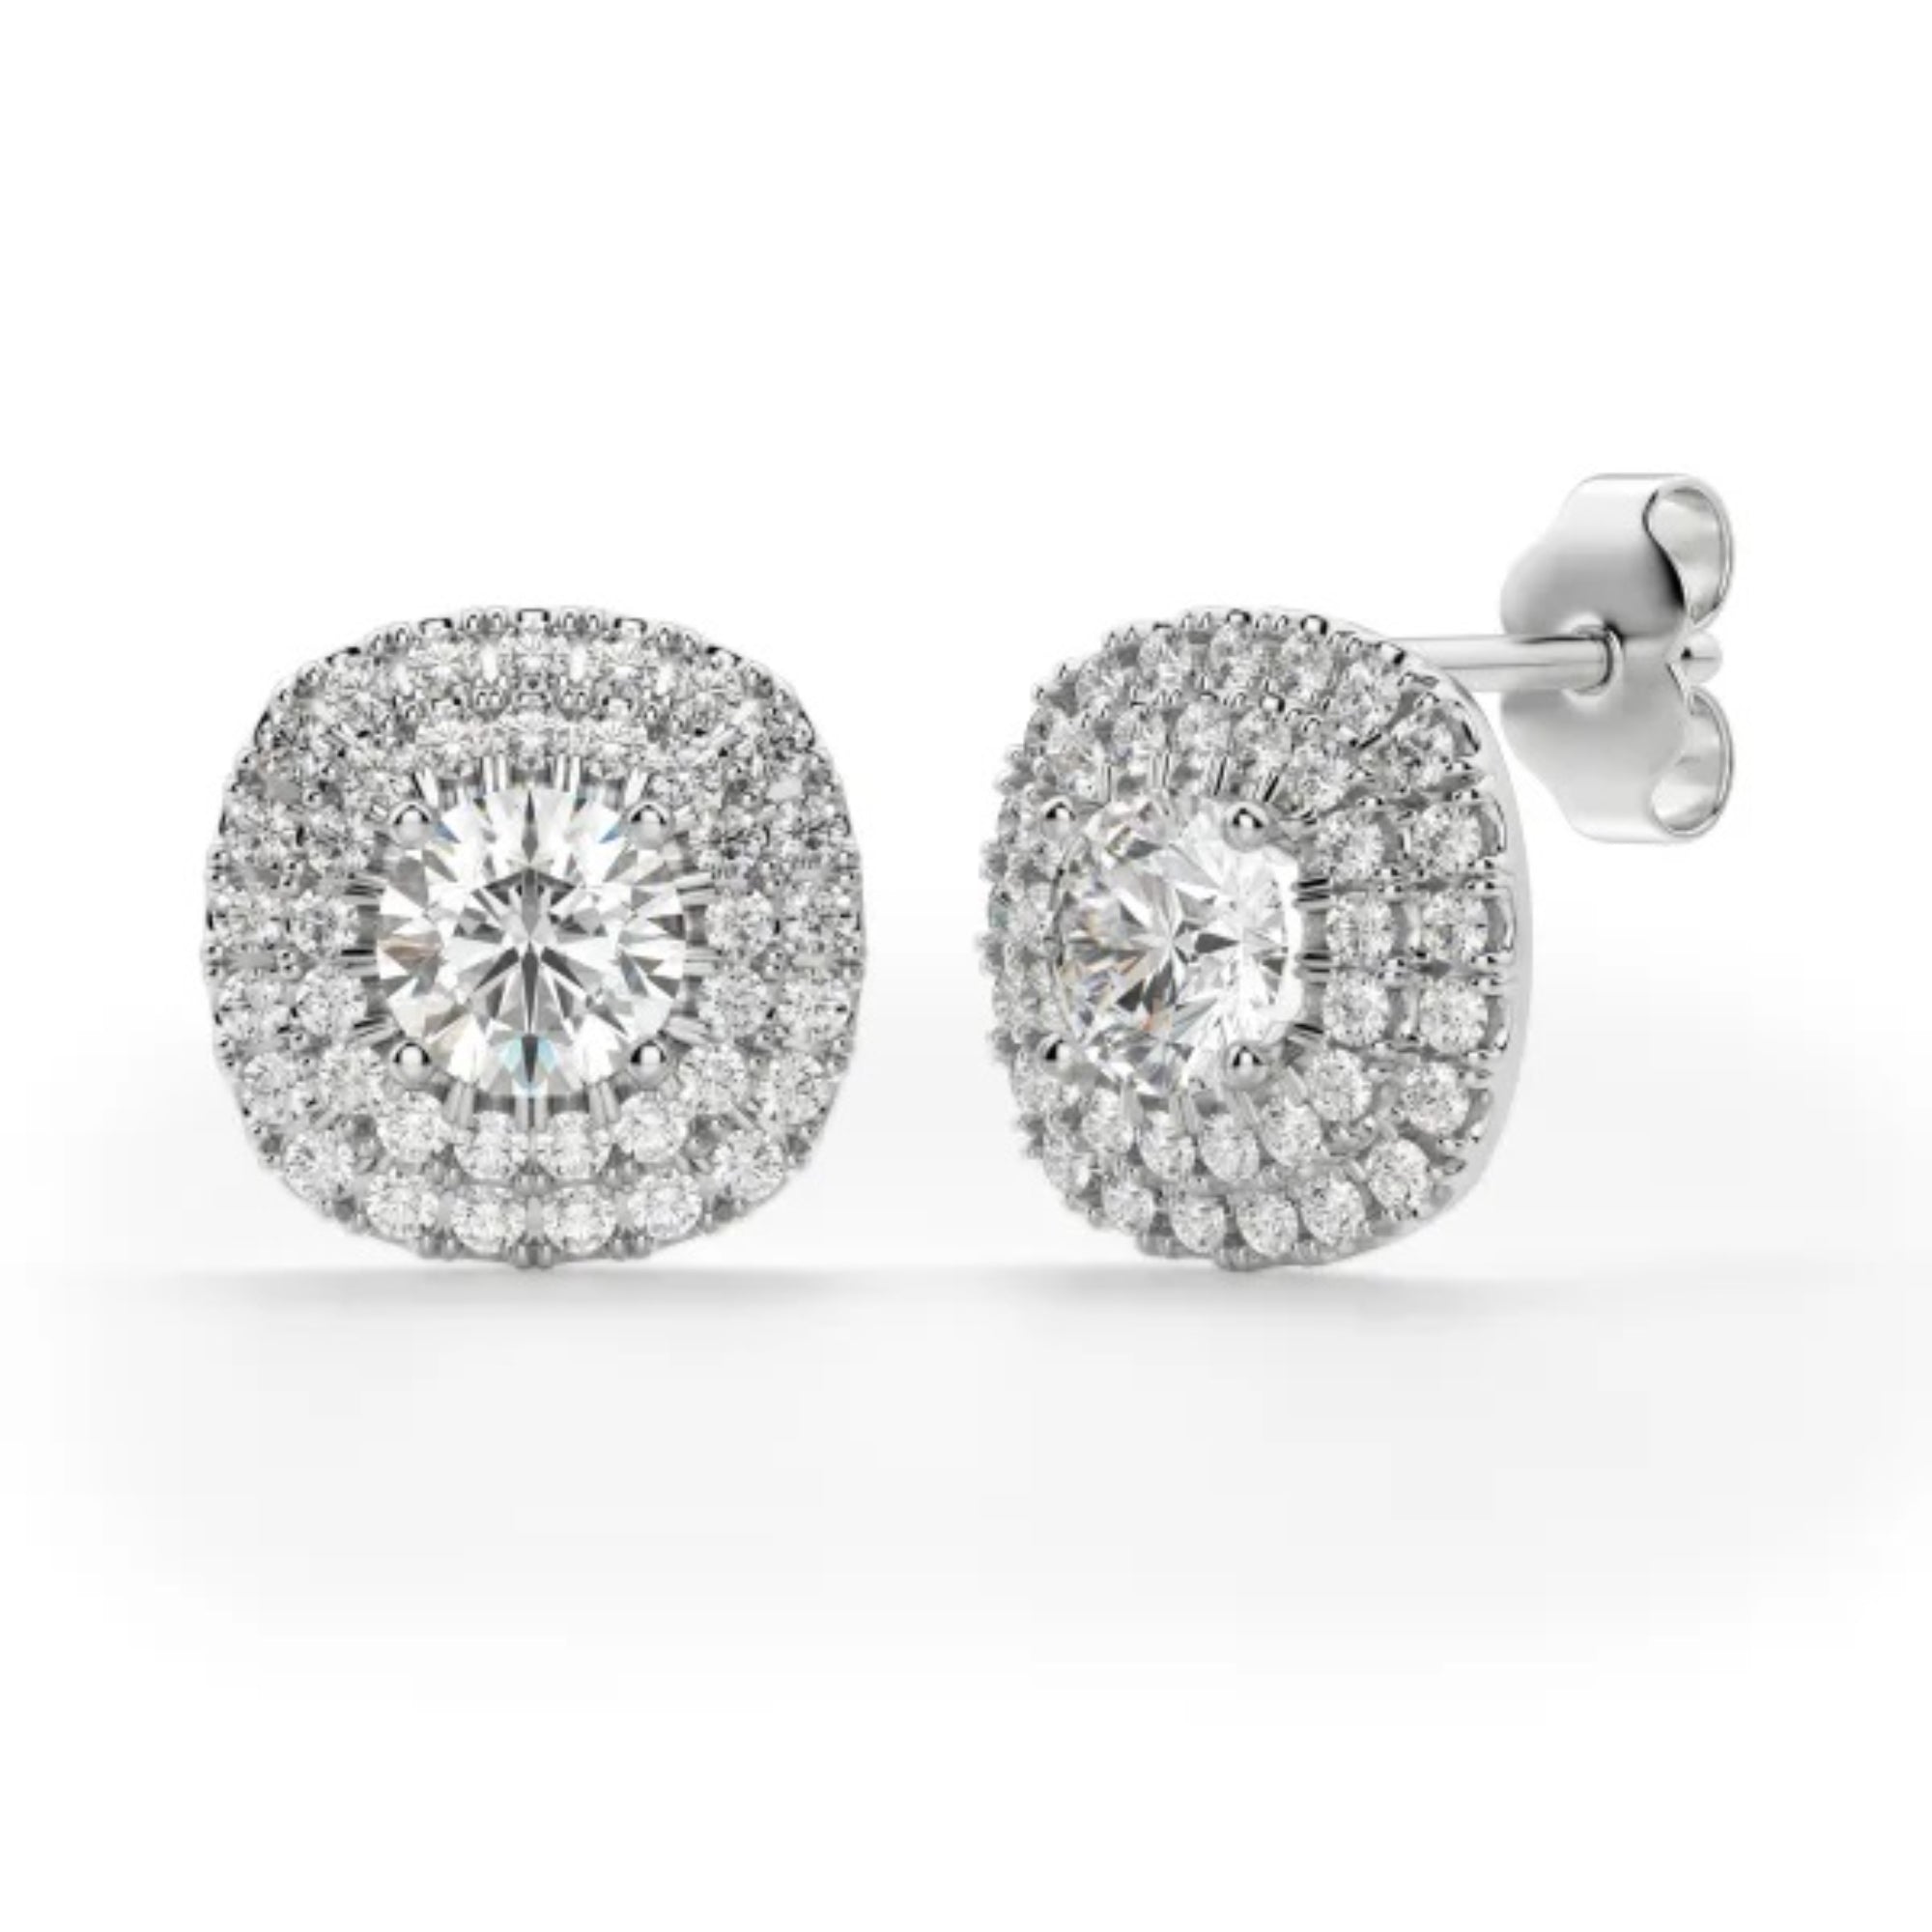 Brilliant Round Cut Double Halo Stud Earrings